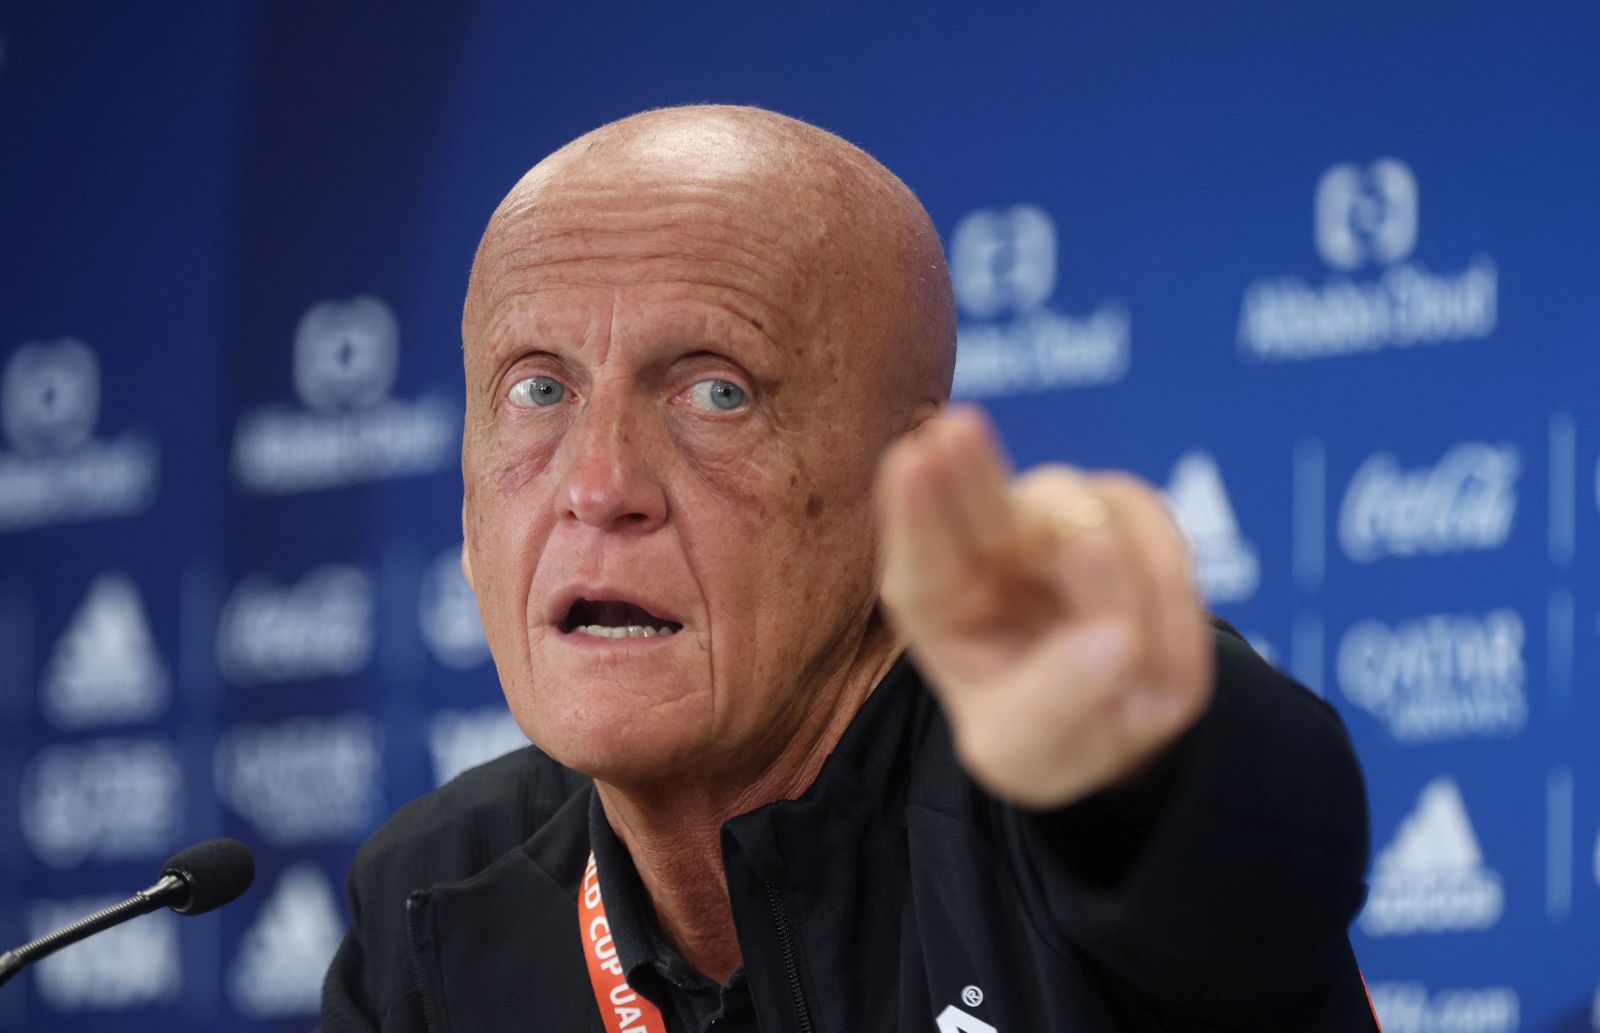 Soccer Football - Club World Cup - A media event with Pierluigi Collina and Sebastian Runge to demonstrate semi-automated offside lines being used - Mohammed Bin Zayed Stadium, Abu Dhabi, United Arab Emirates - February 9, 2022  FIFA's Chairman of the Referees Committee, Pierluigi Collina during an event to demonstrate semi-automated offside lines being used  REUTERS/Matthew Childs